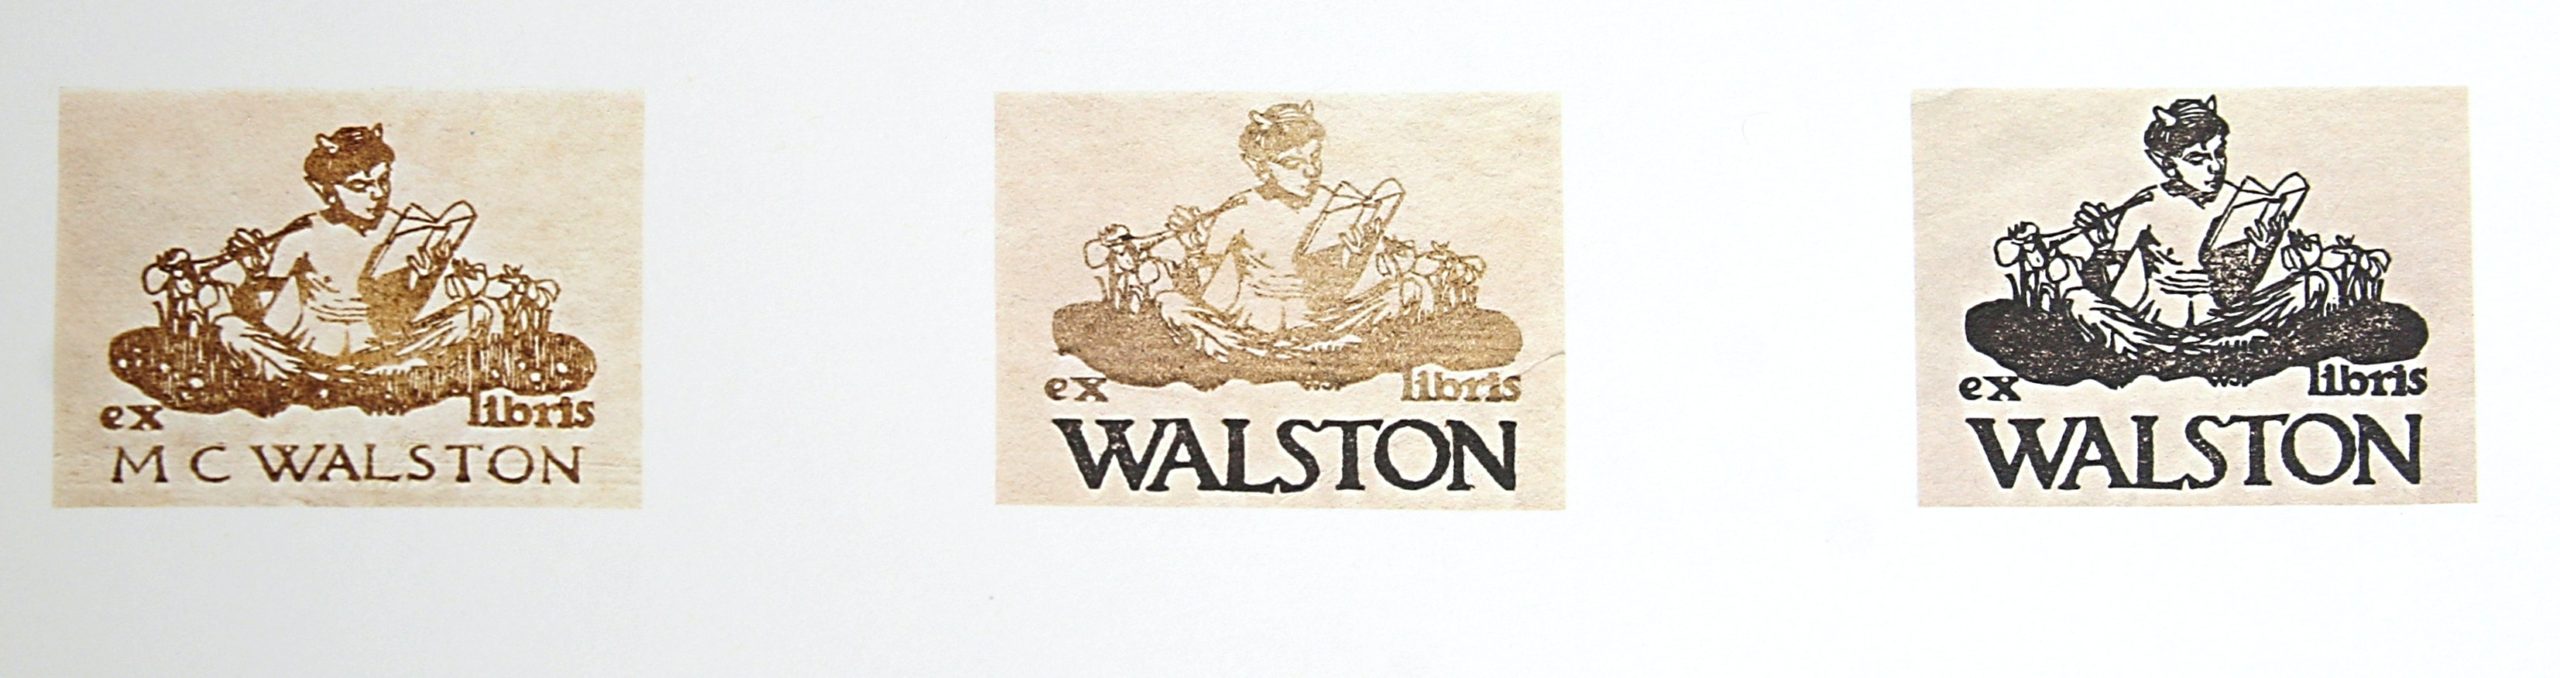 Bookplate for M.C. Walston by WJ Phillips